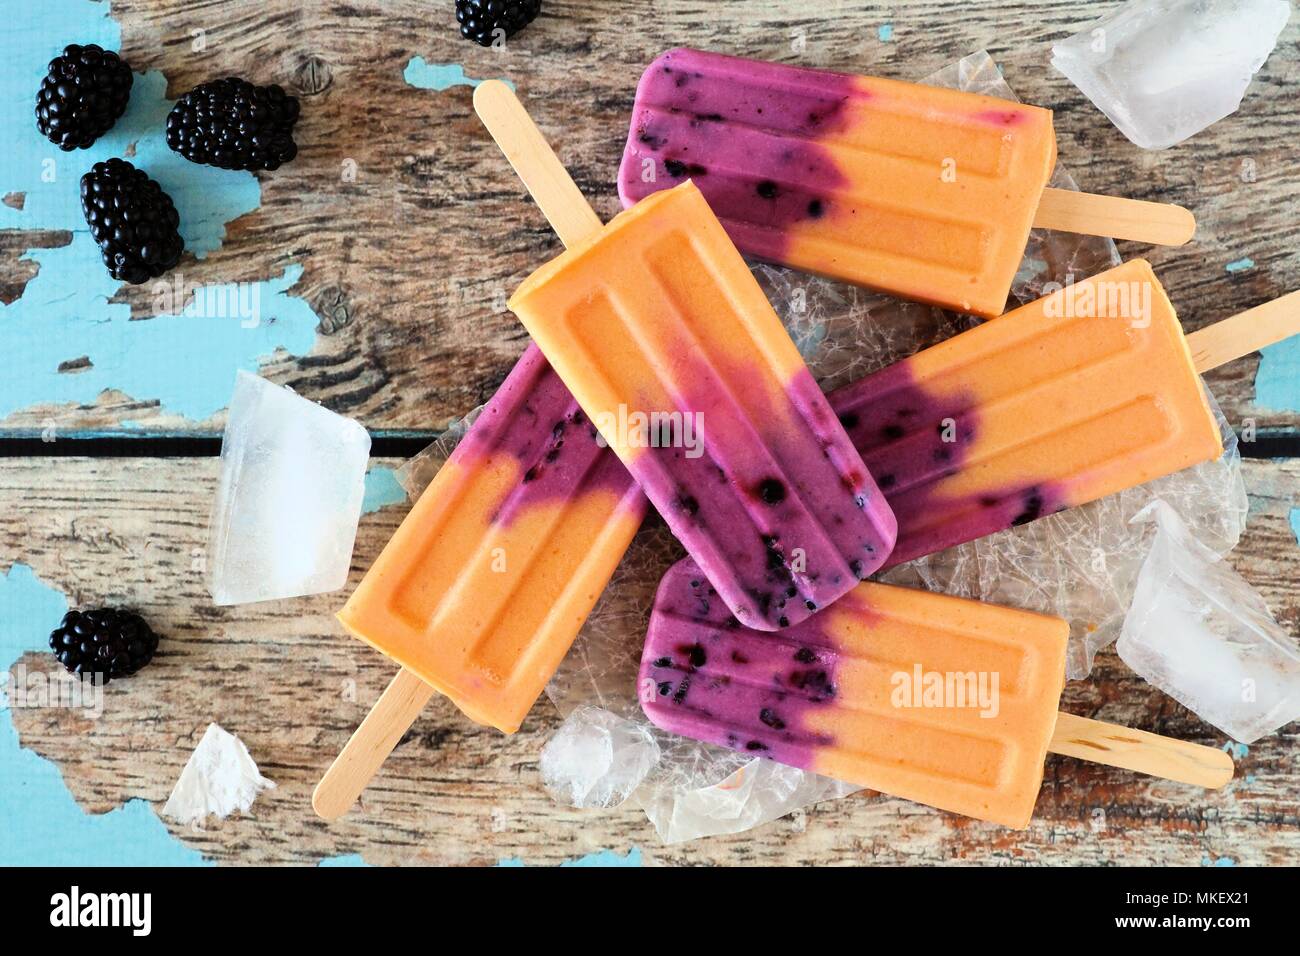 Mango blackberry ice pops in a cluster. Top view scene over a rustic wood background. Stock Photo